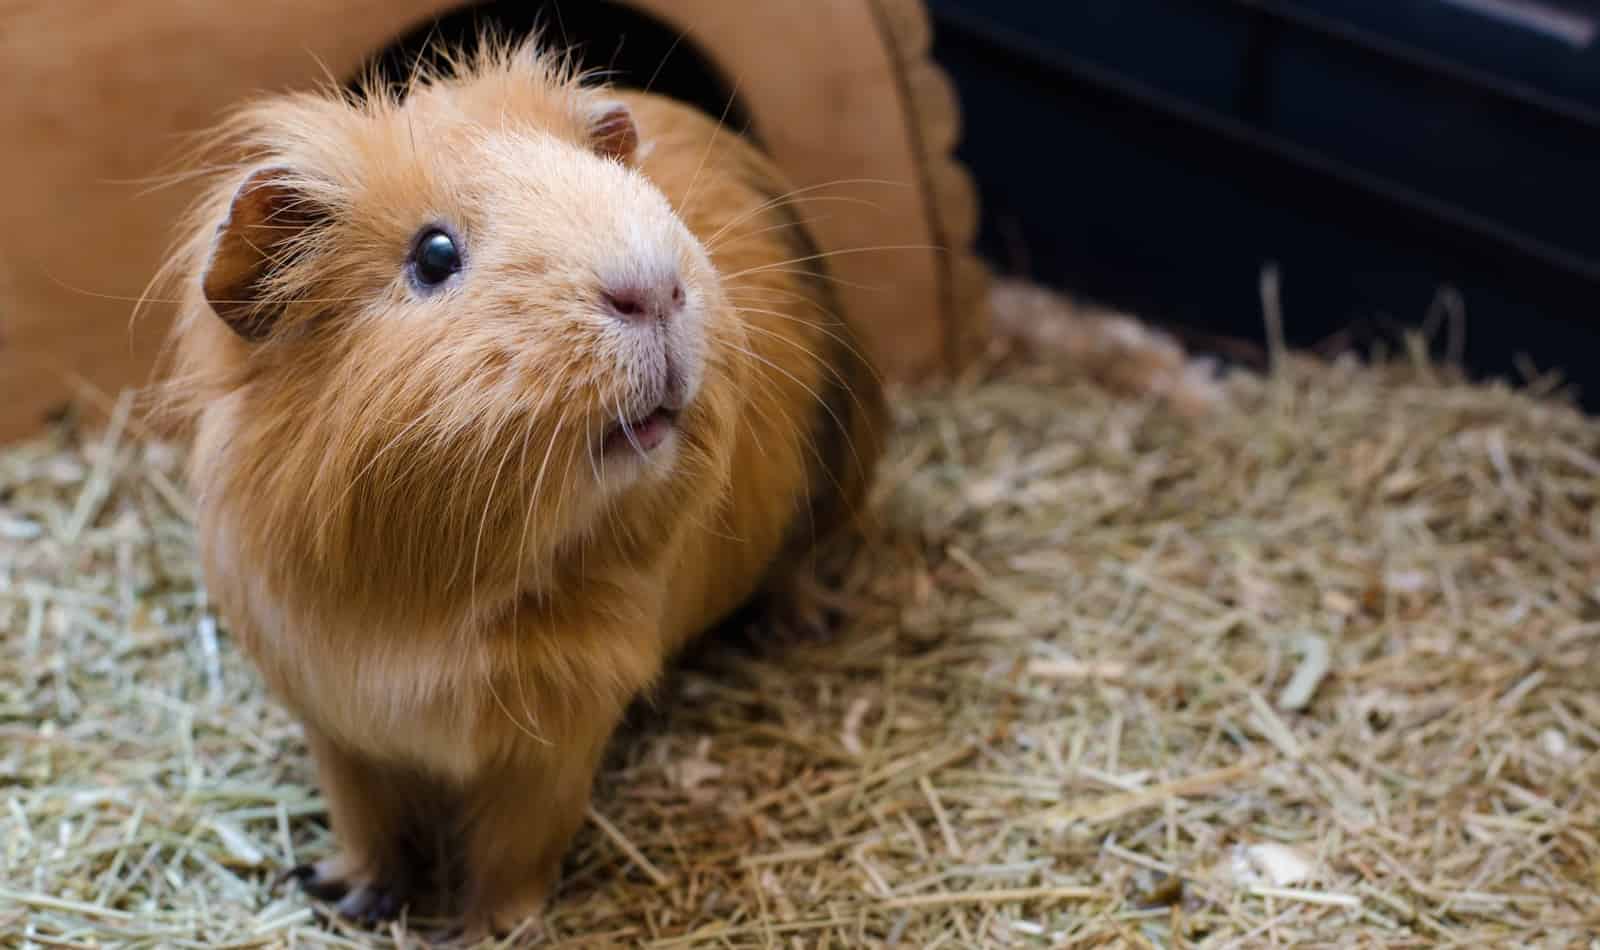 If you're looking for some great guinea pig names starting with P, come on in! We narrowed down thousands to our top 100 favorites!